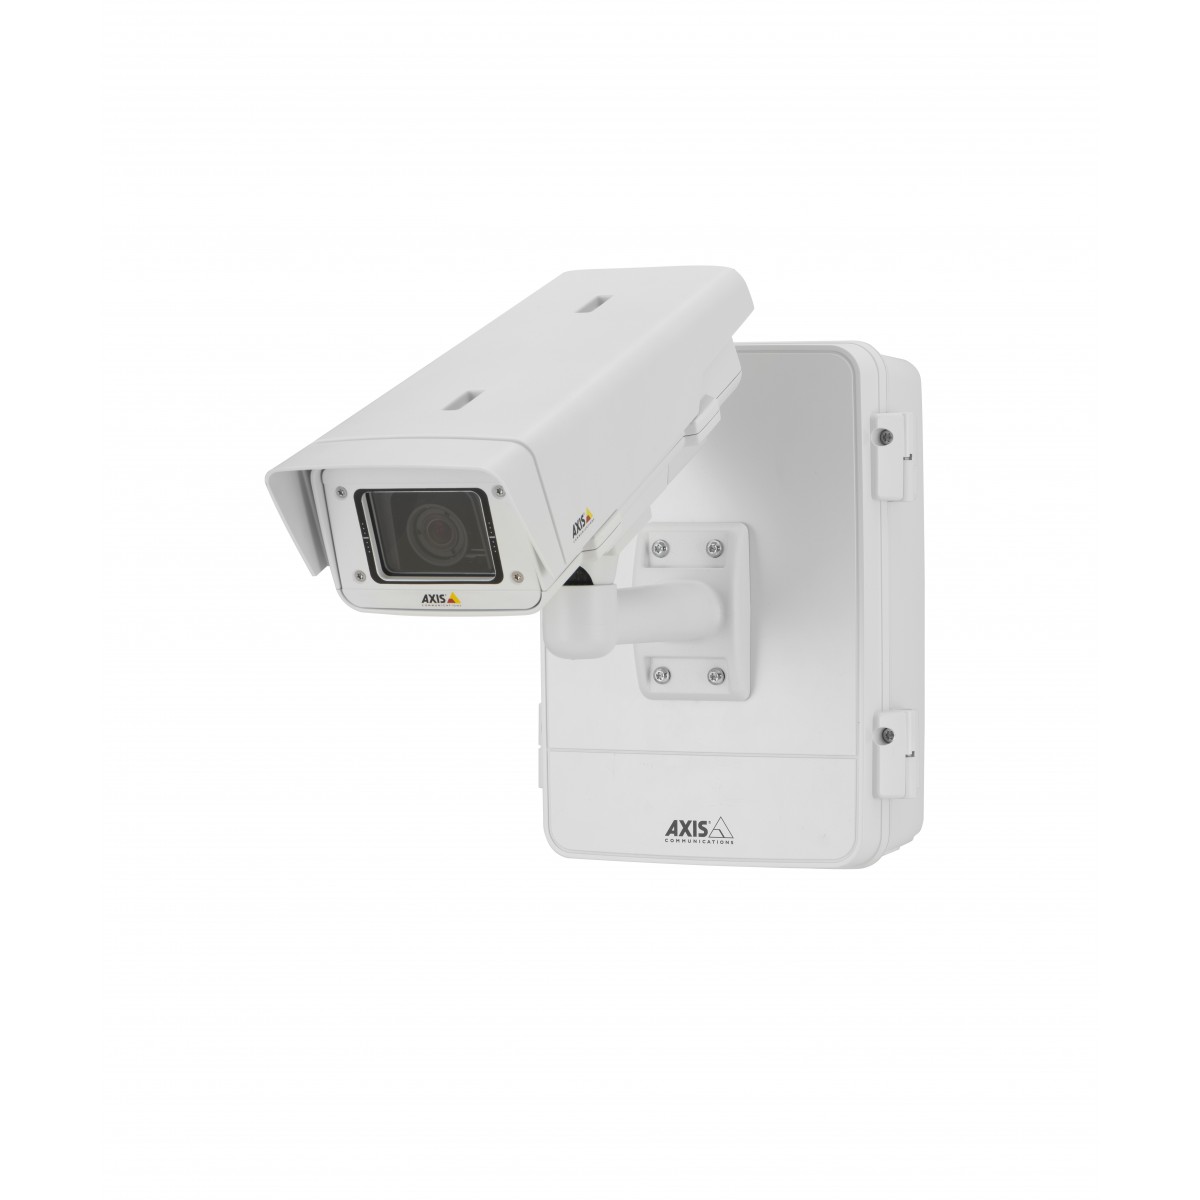 Axis T98A16-VE - Housing  mount - Outdoor - Stainless steel - White - Stainless steel - IEC 60529 IP66 - NEMA 250 rating Type 4X